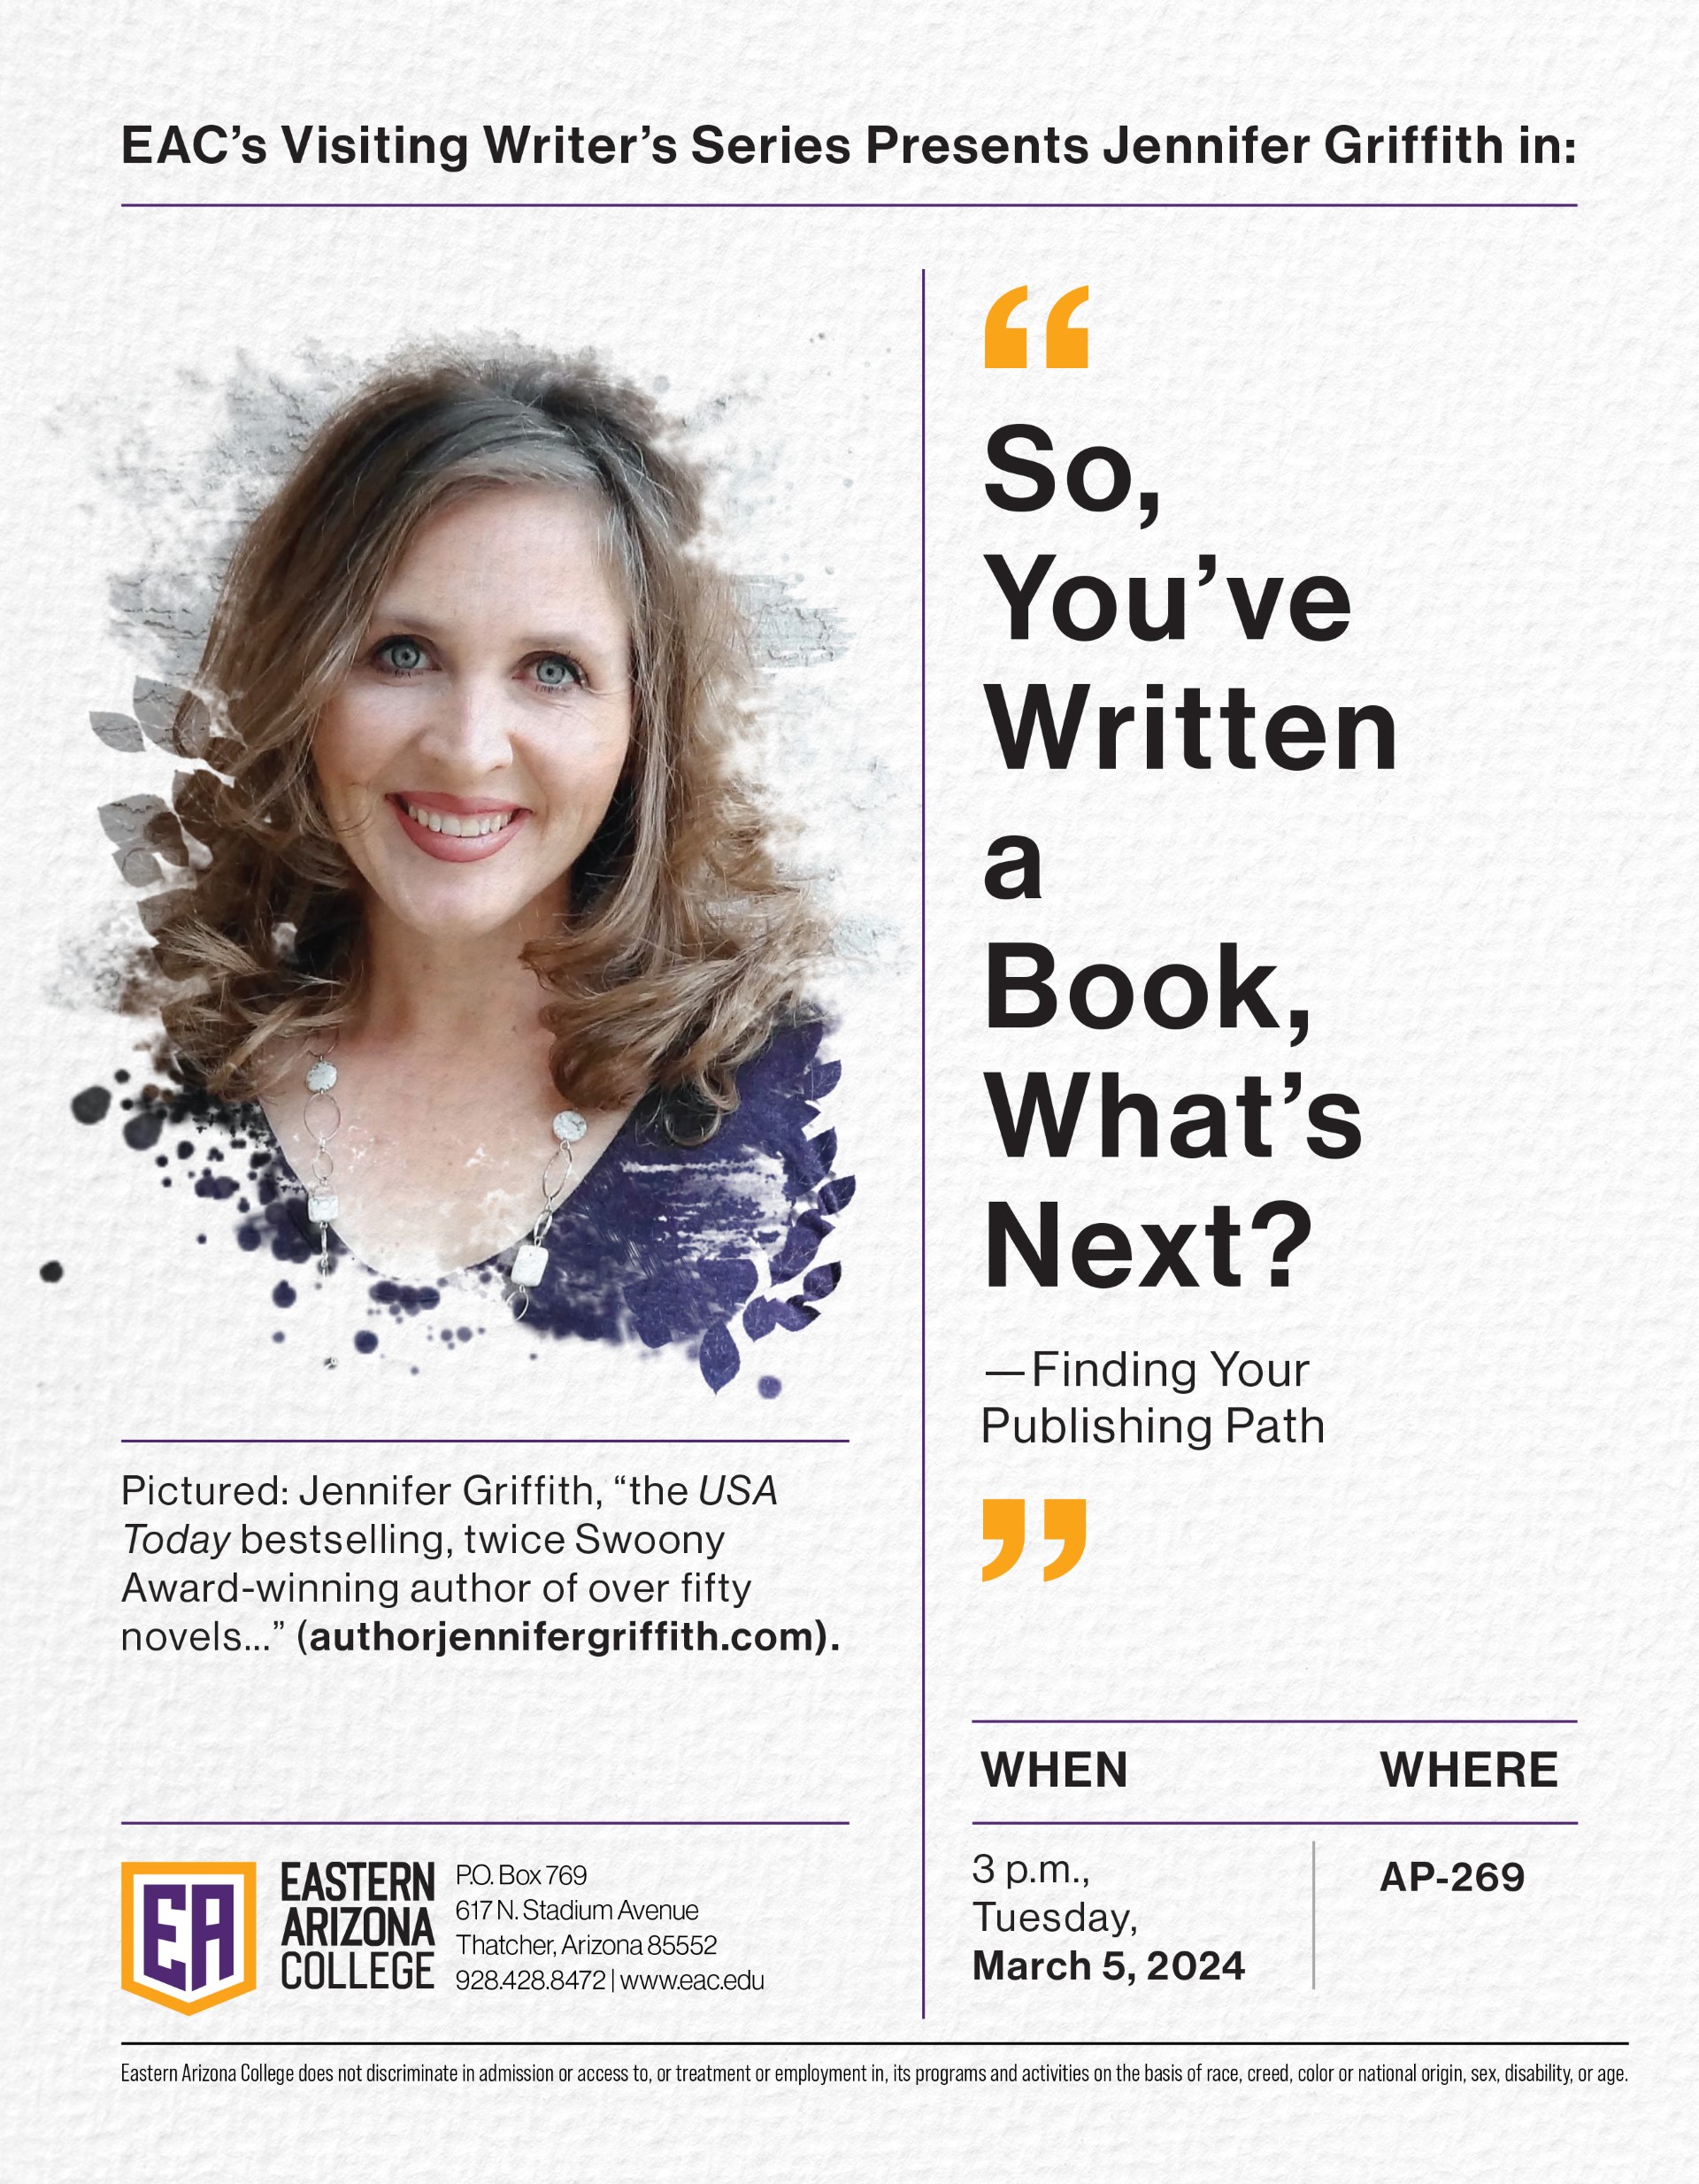 EA invites community to Visiting Writers Series Event featuring bestselling author Jennifer Griffith